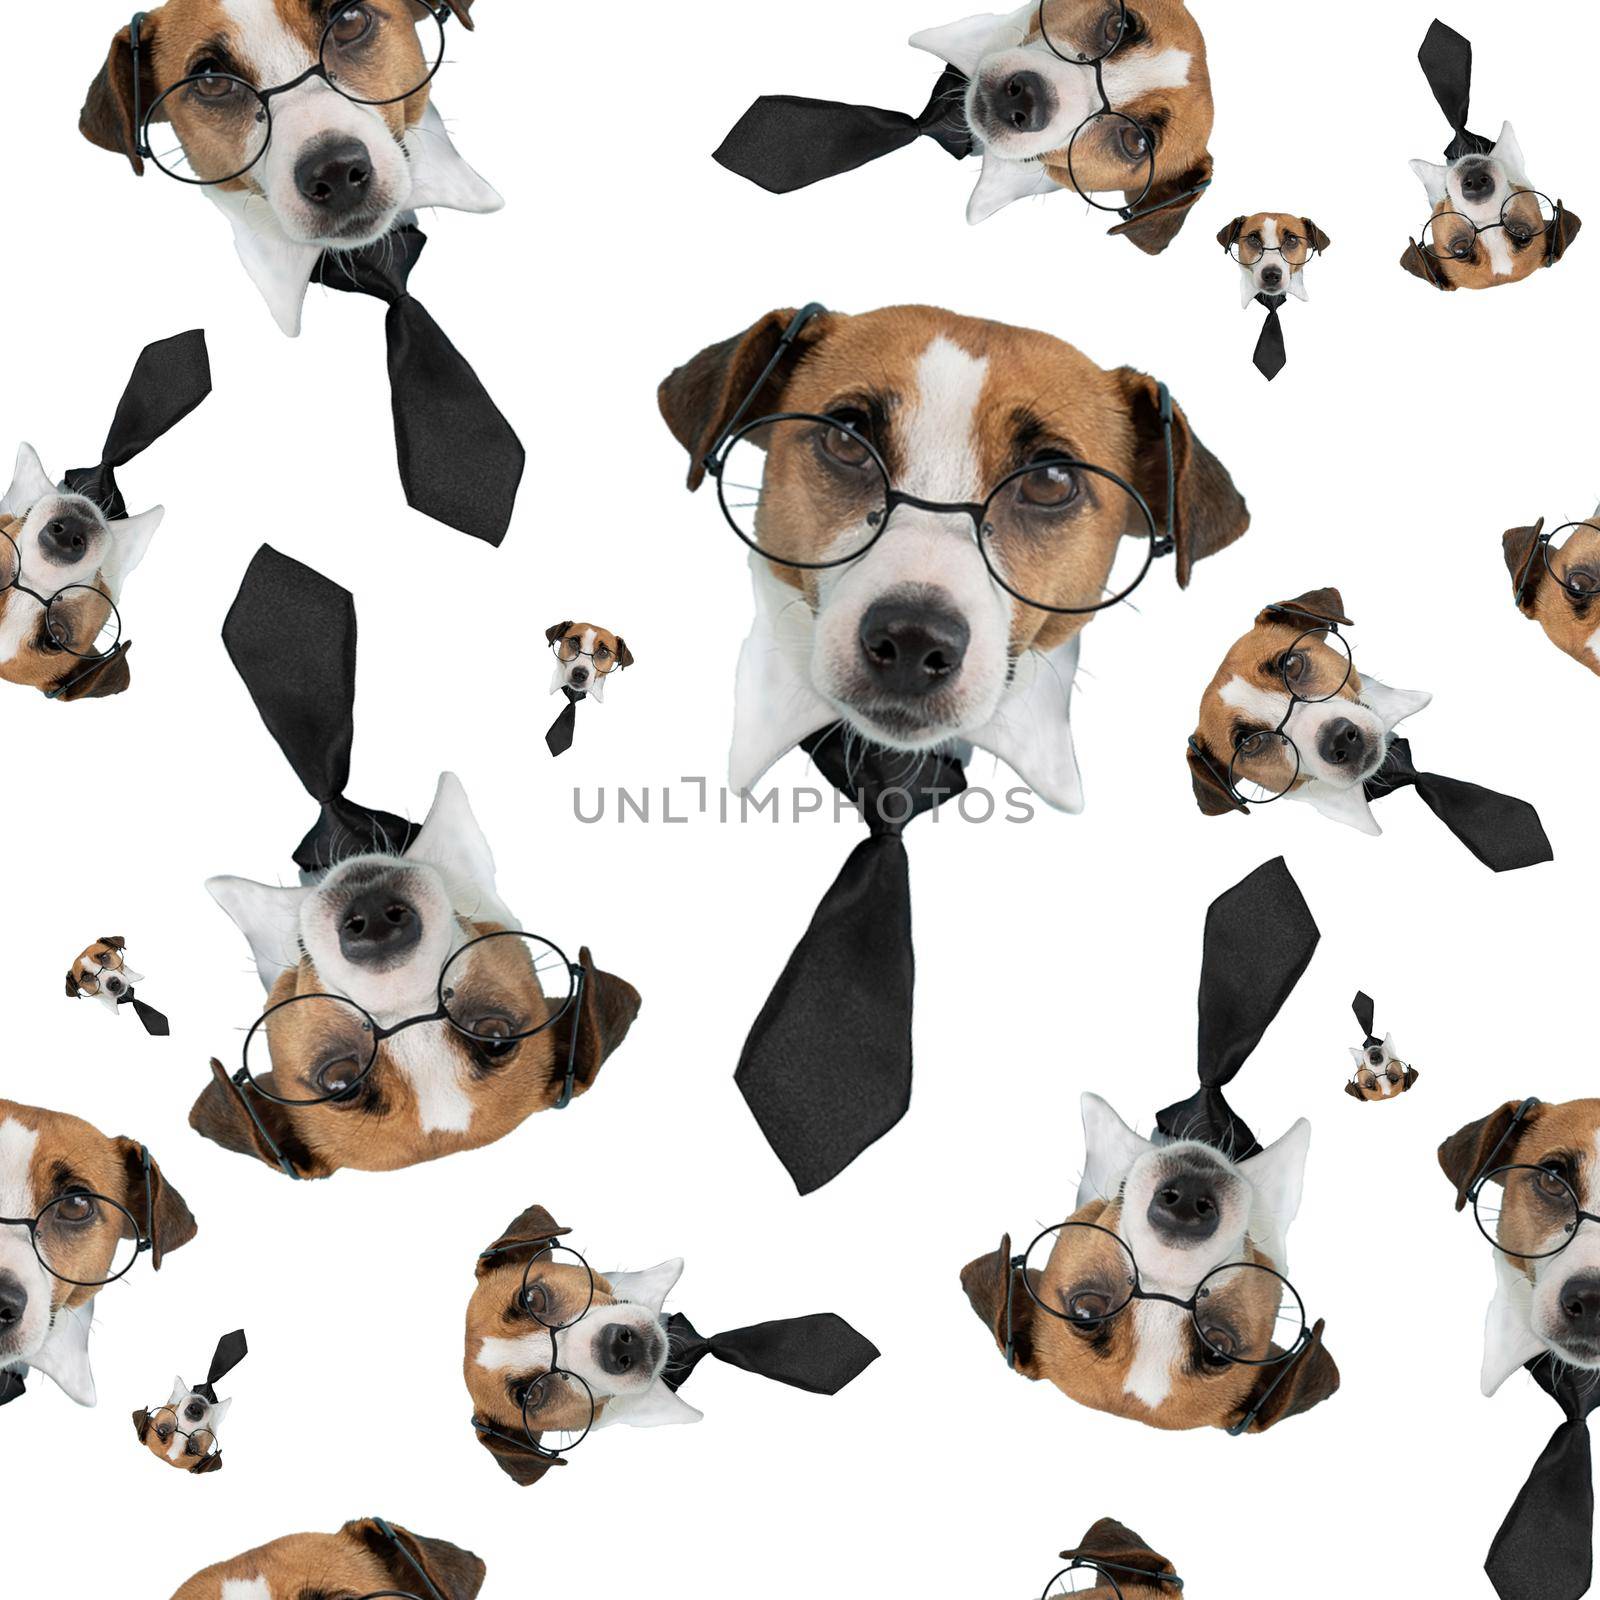 Muzzle of a Jack Russell Terrier dog with glasses and a tie on a white background. Isolate. Seamless pattern